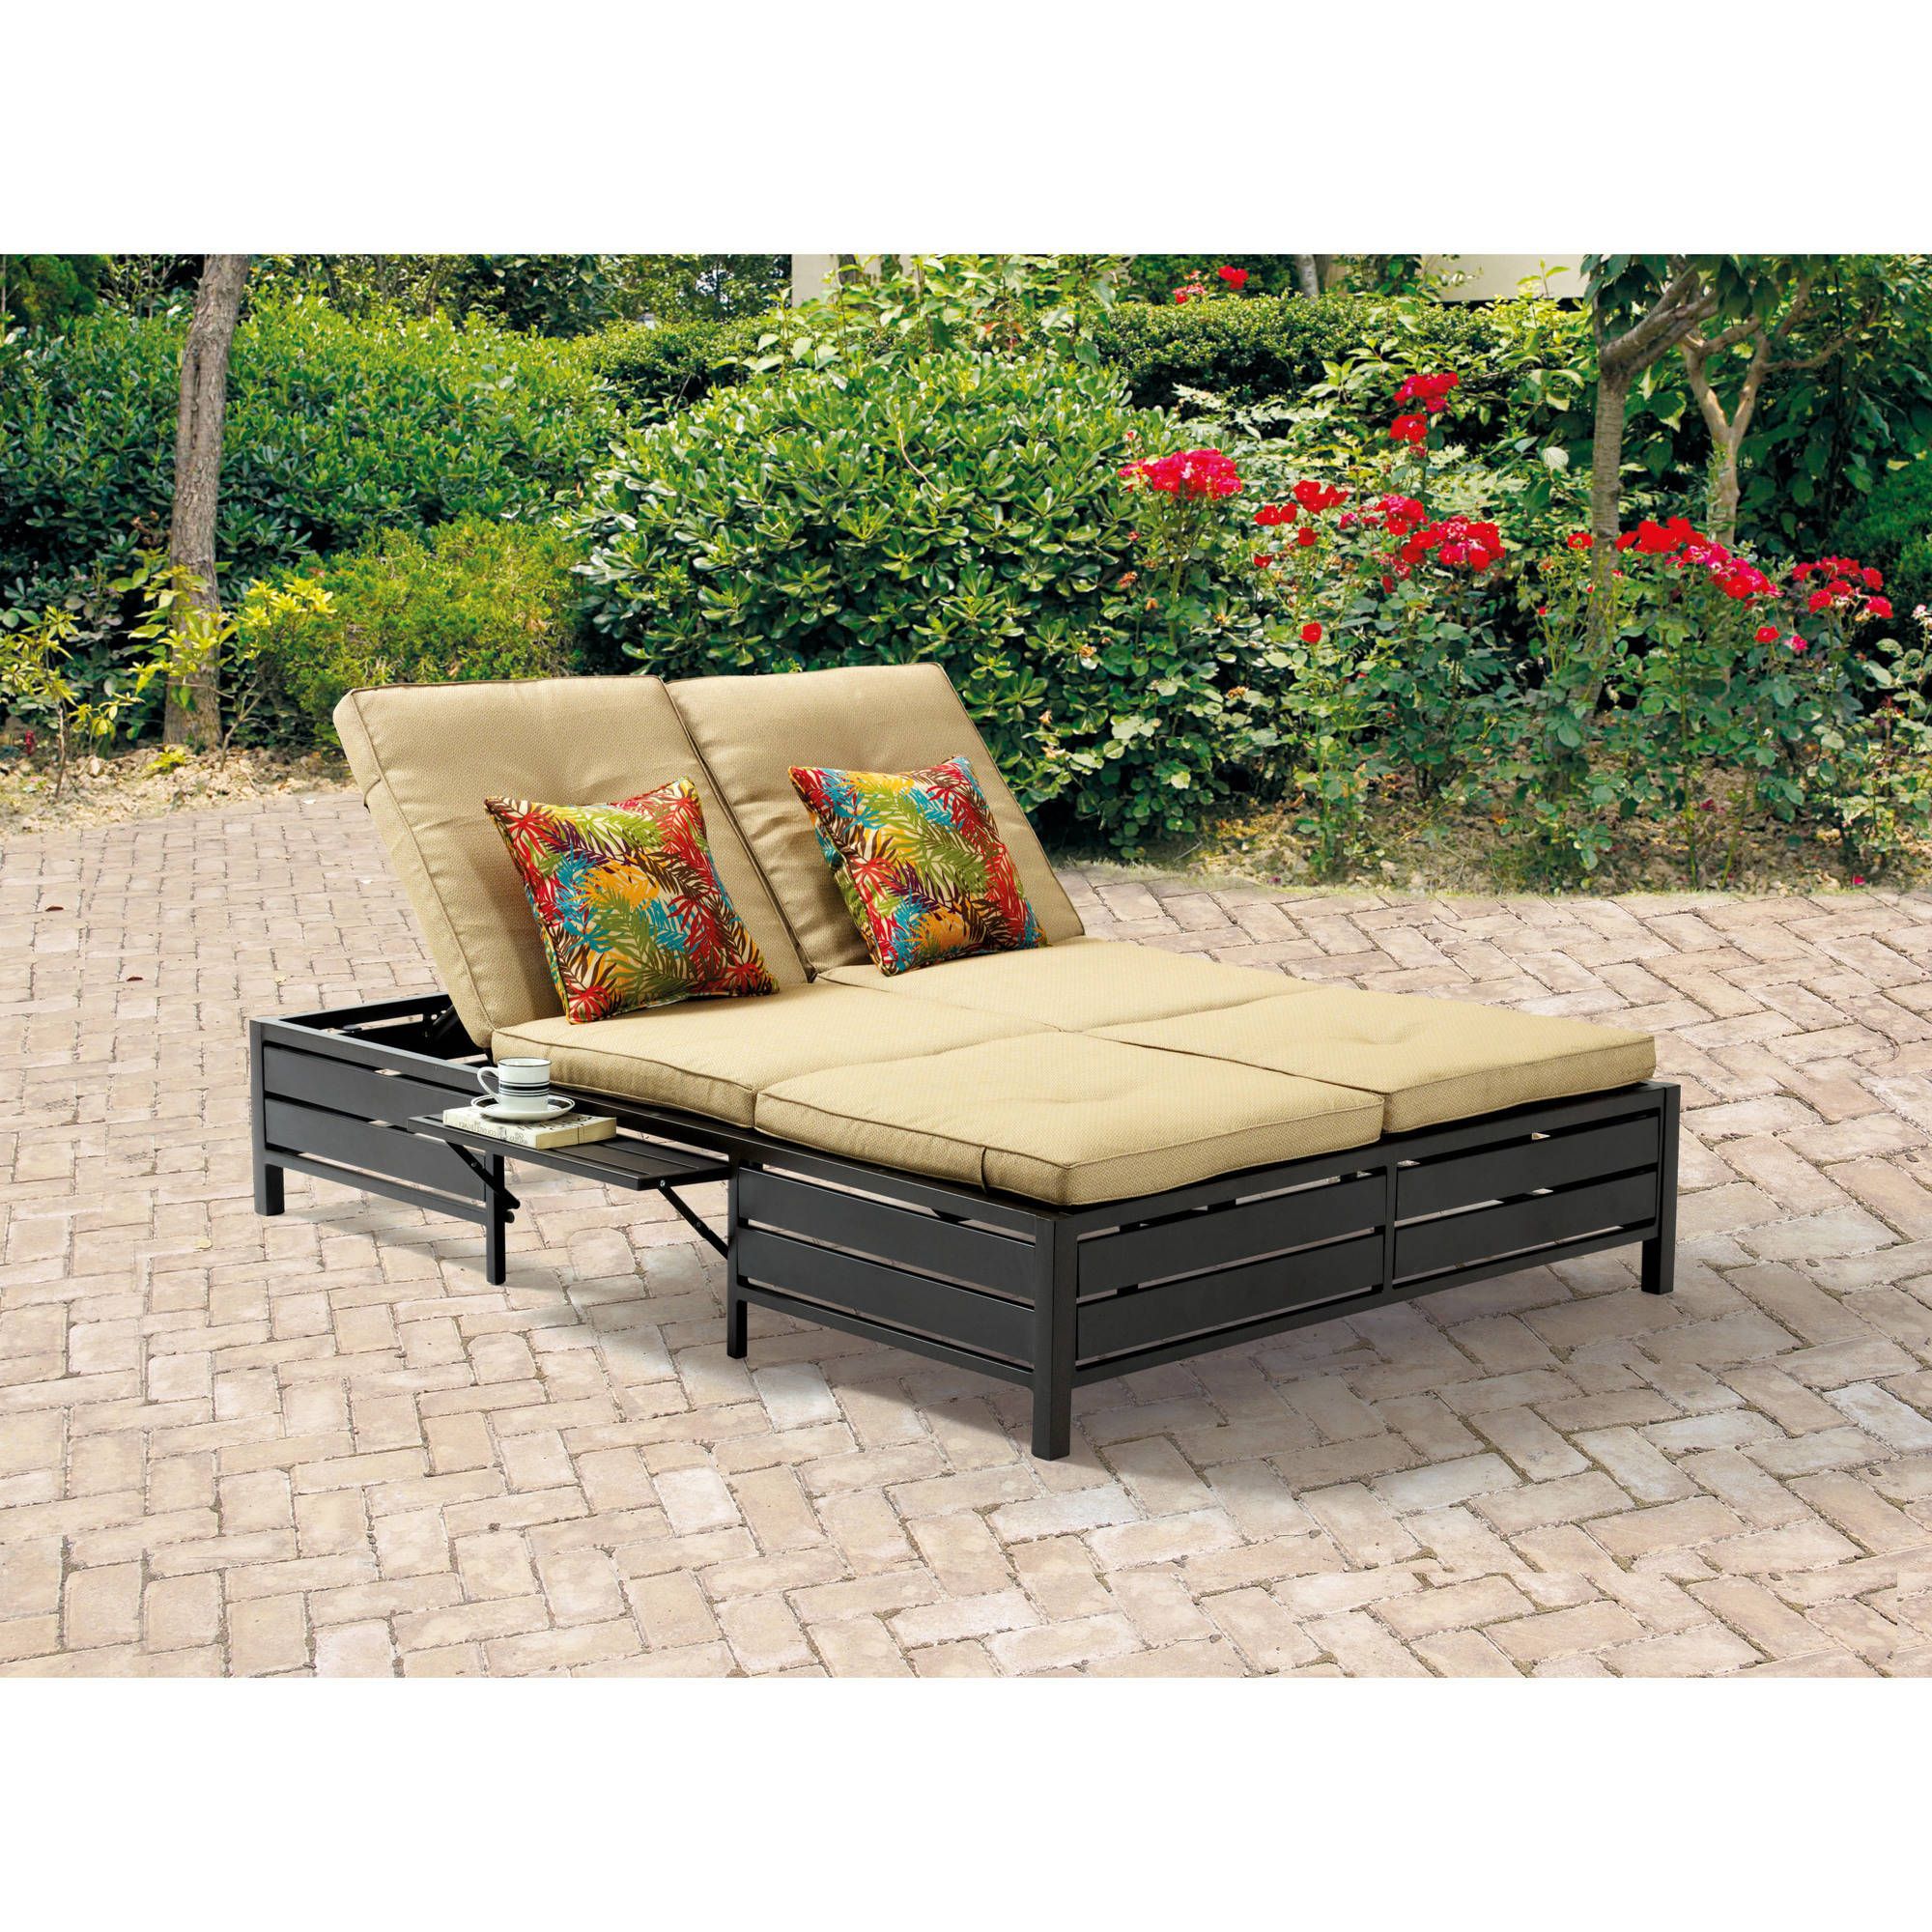 Most Recent Mainstays Outdoor Double Chaise Lounger, Tan, Seats 2 With Regard To 2 Piece Outdoor Wicker Chaise Lounge Chairs (View 10 of 25)